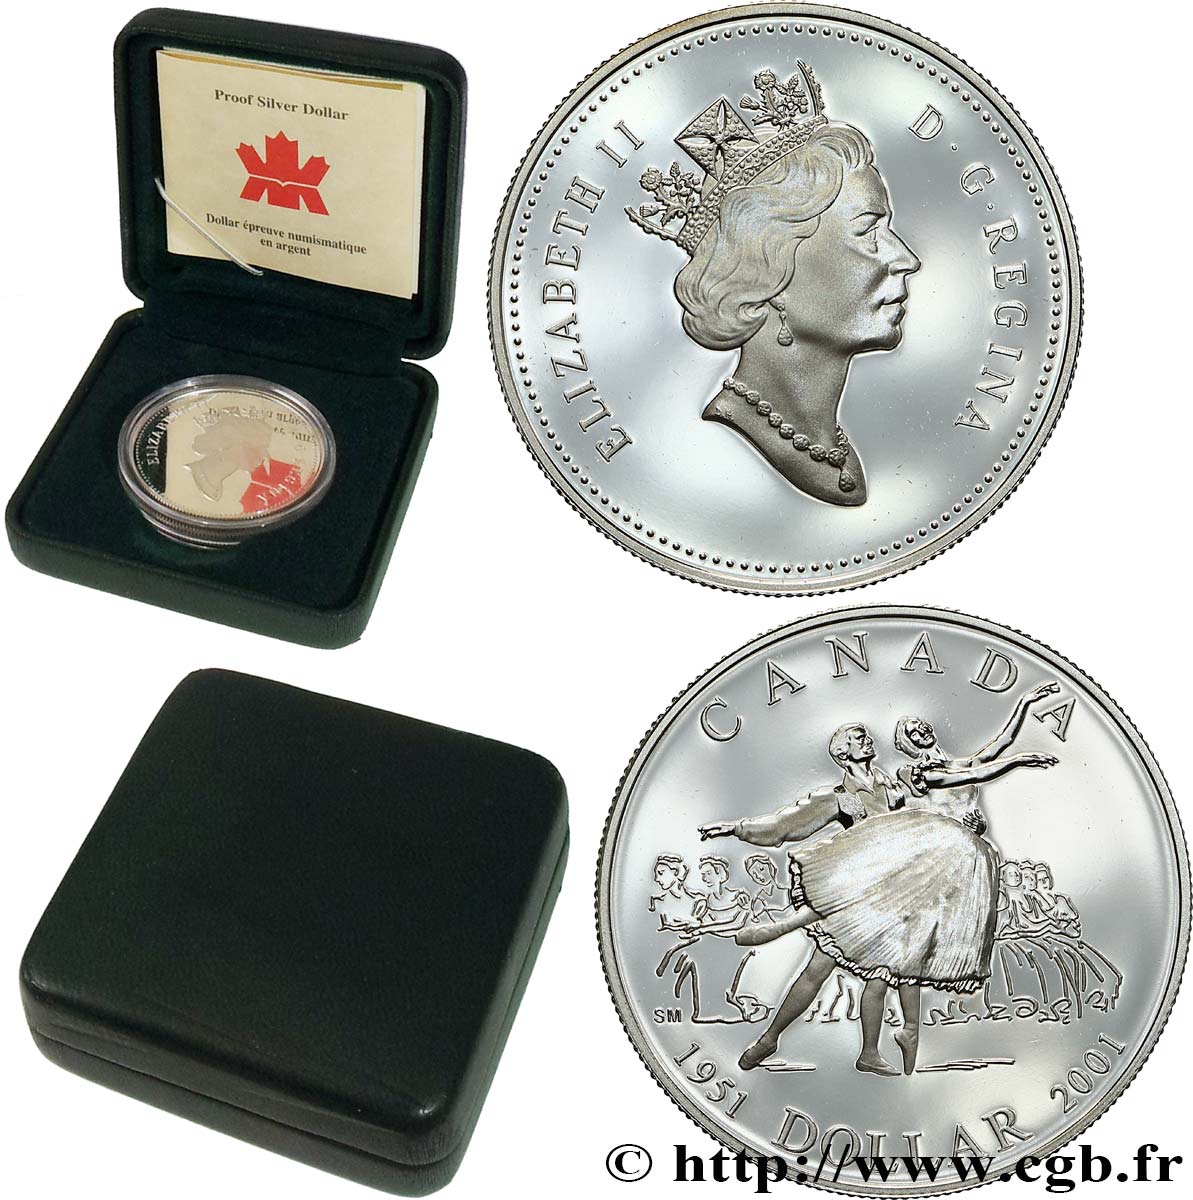 CANADA Dollar Proof - Le ballet national du Canada 2001  BE 